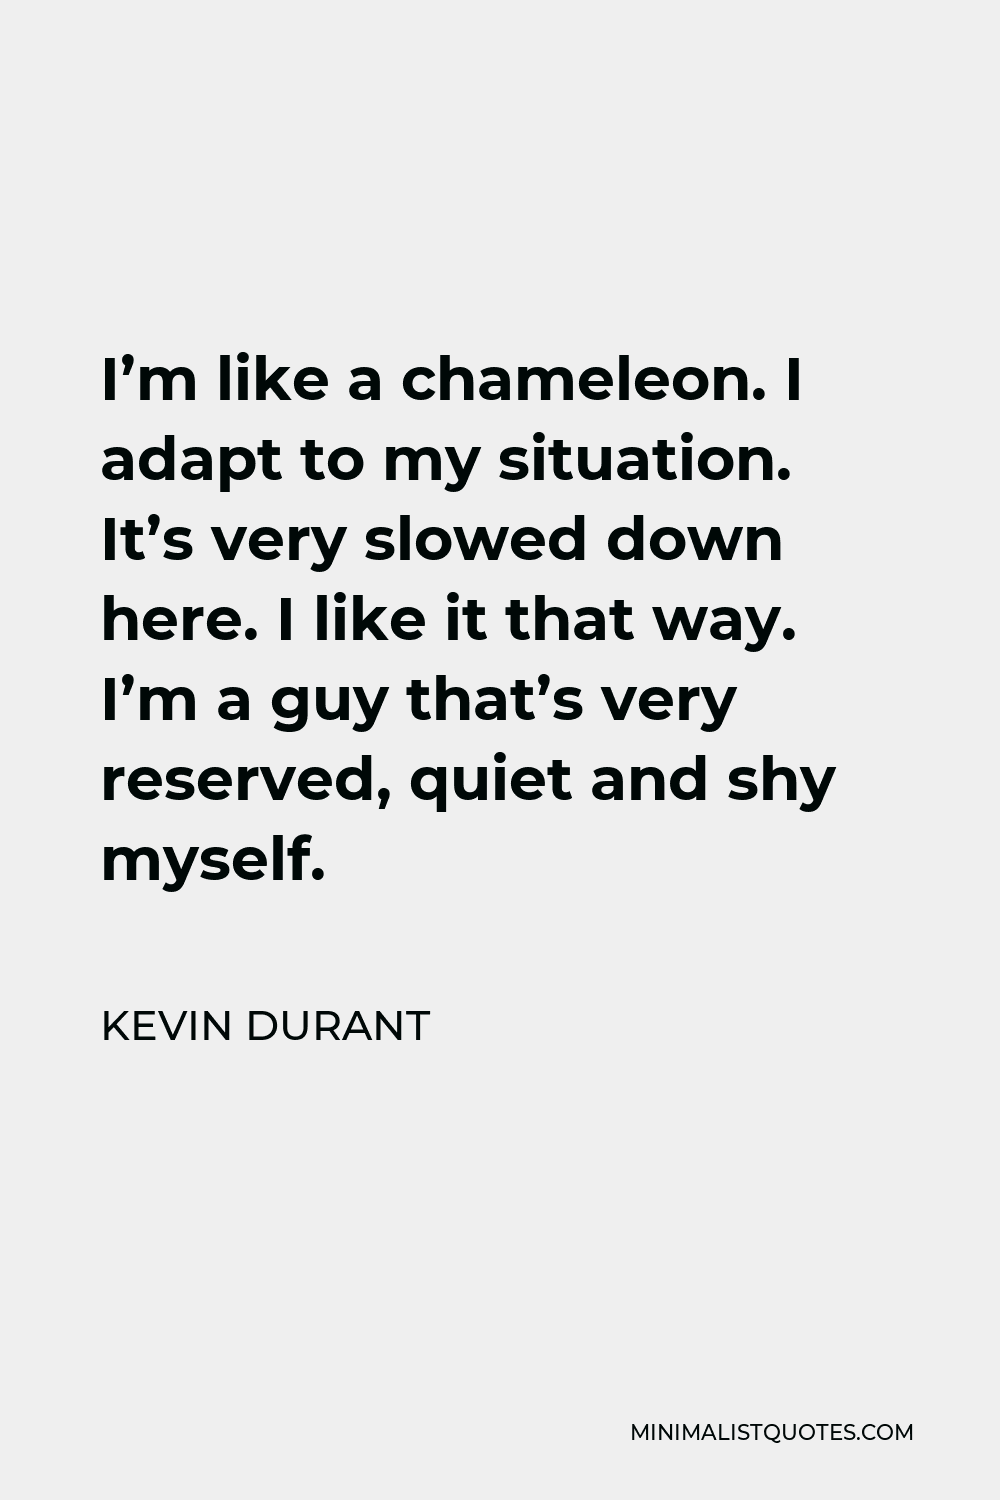 Kevin Durant Quote - I’m like a chameleon. I adapt to my situation. It’s very slowed down here. I like it that way. I’m a guy that’s very reserved, quiet and shy myself.